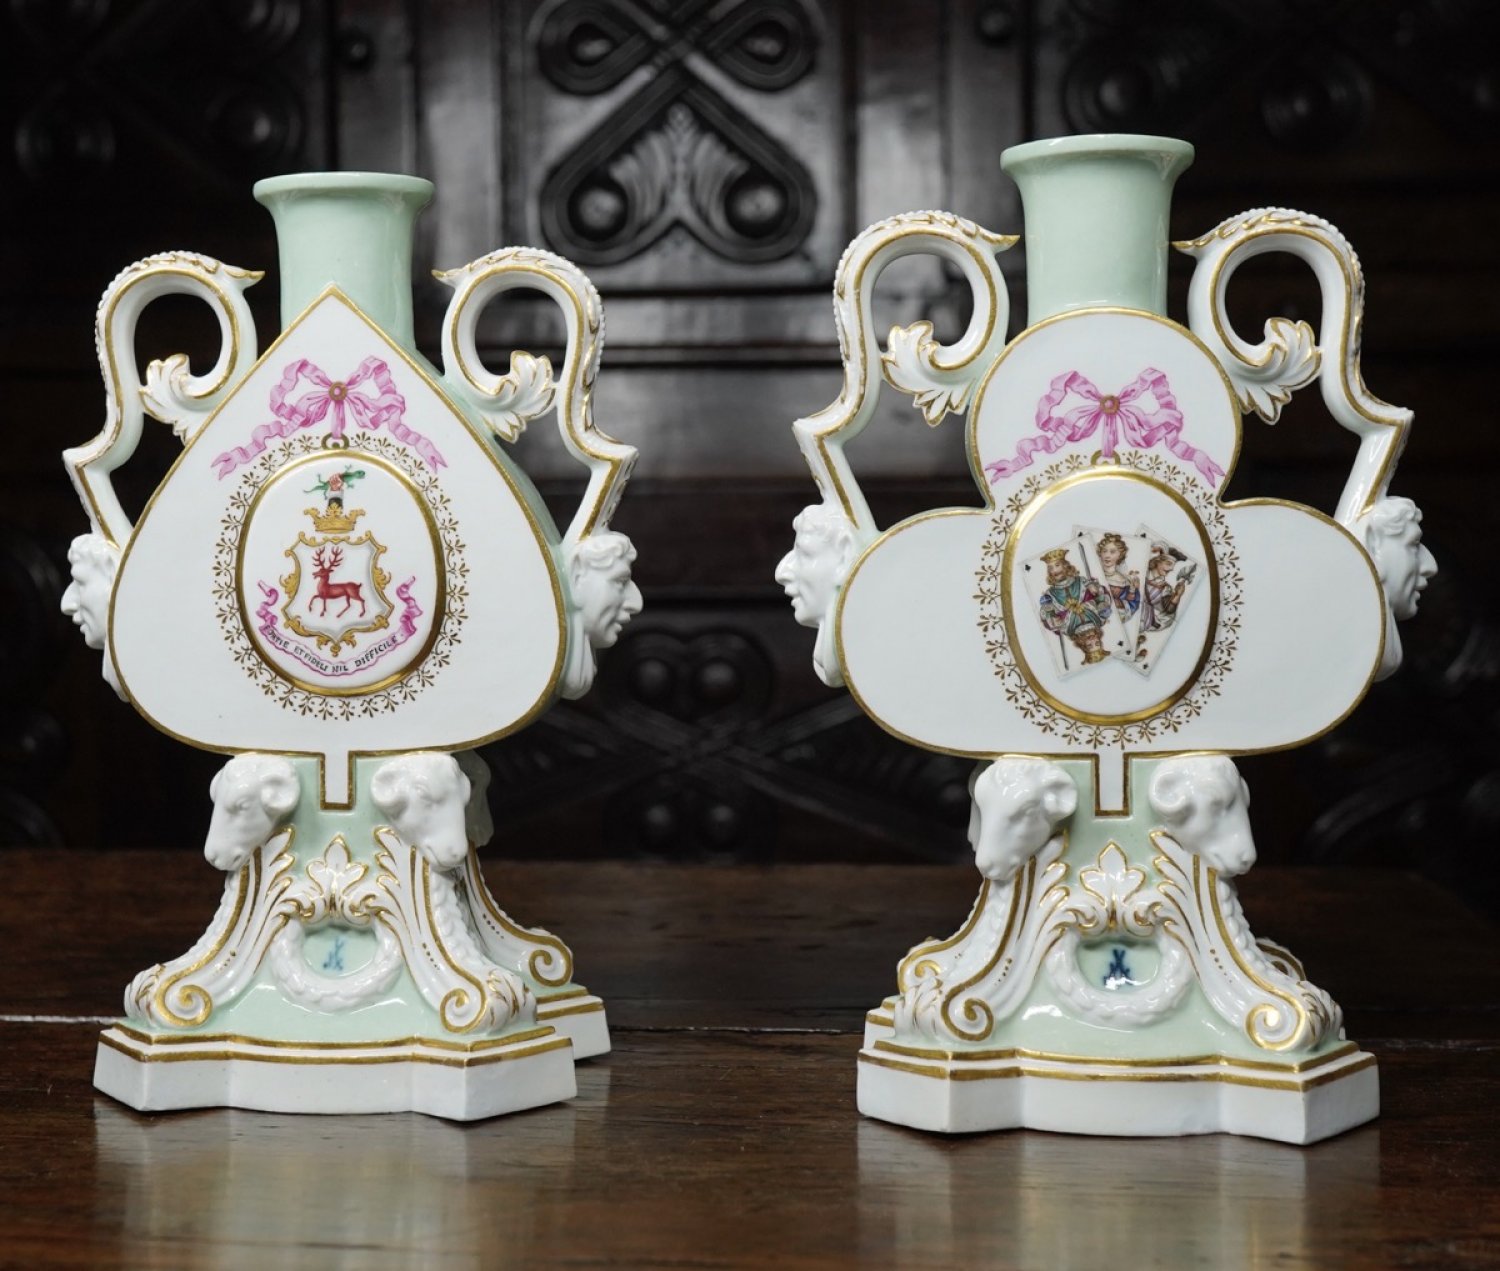 Rare Pair of Meissen playing card theme candlestick vases, made for Litchfield of London 1876